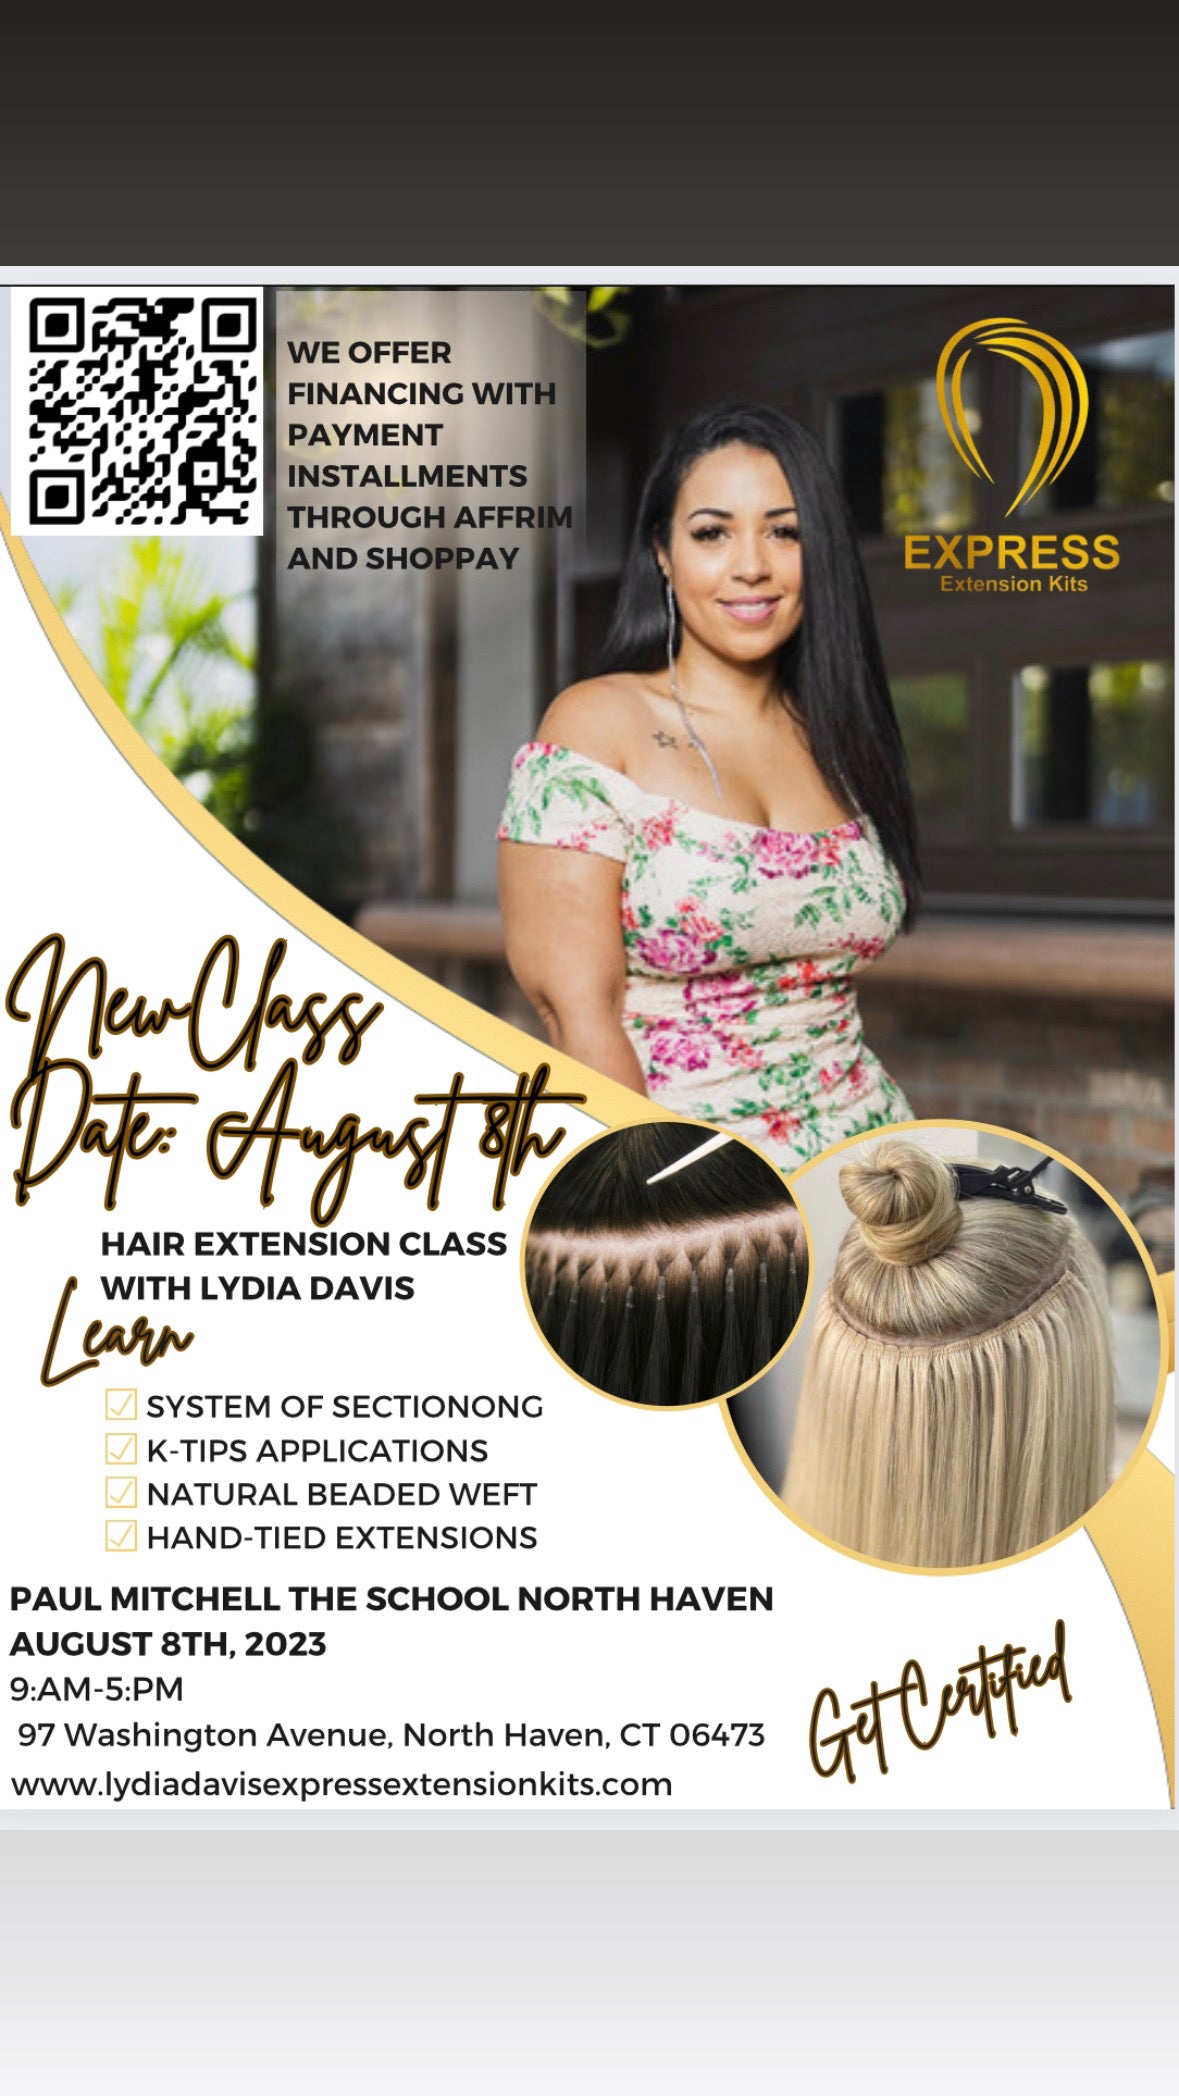 PMTS-North Haven Express Hair Extension Class